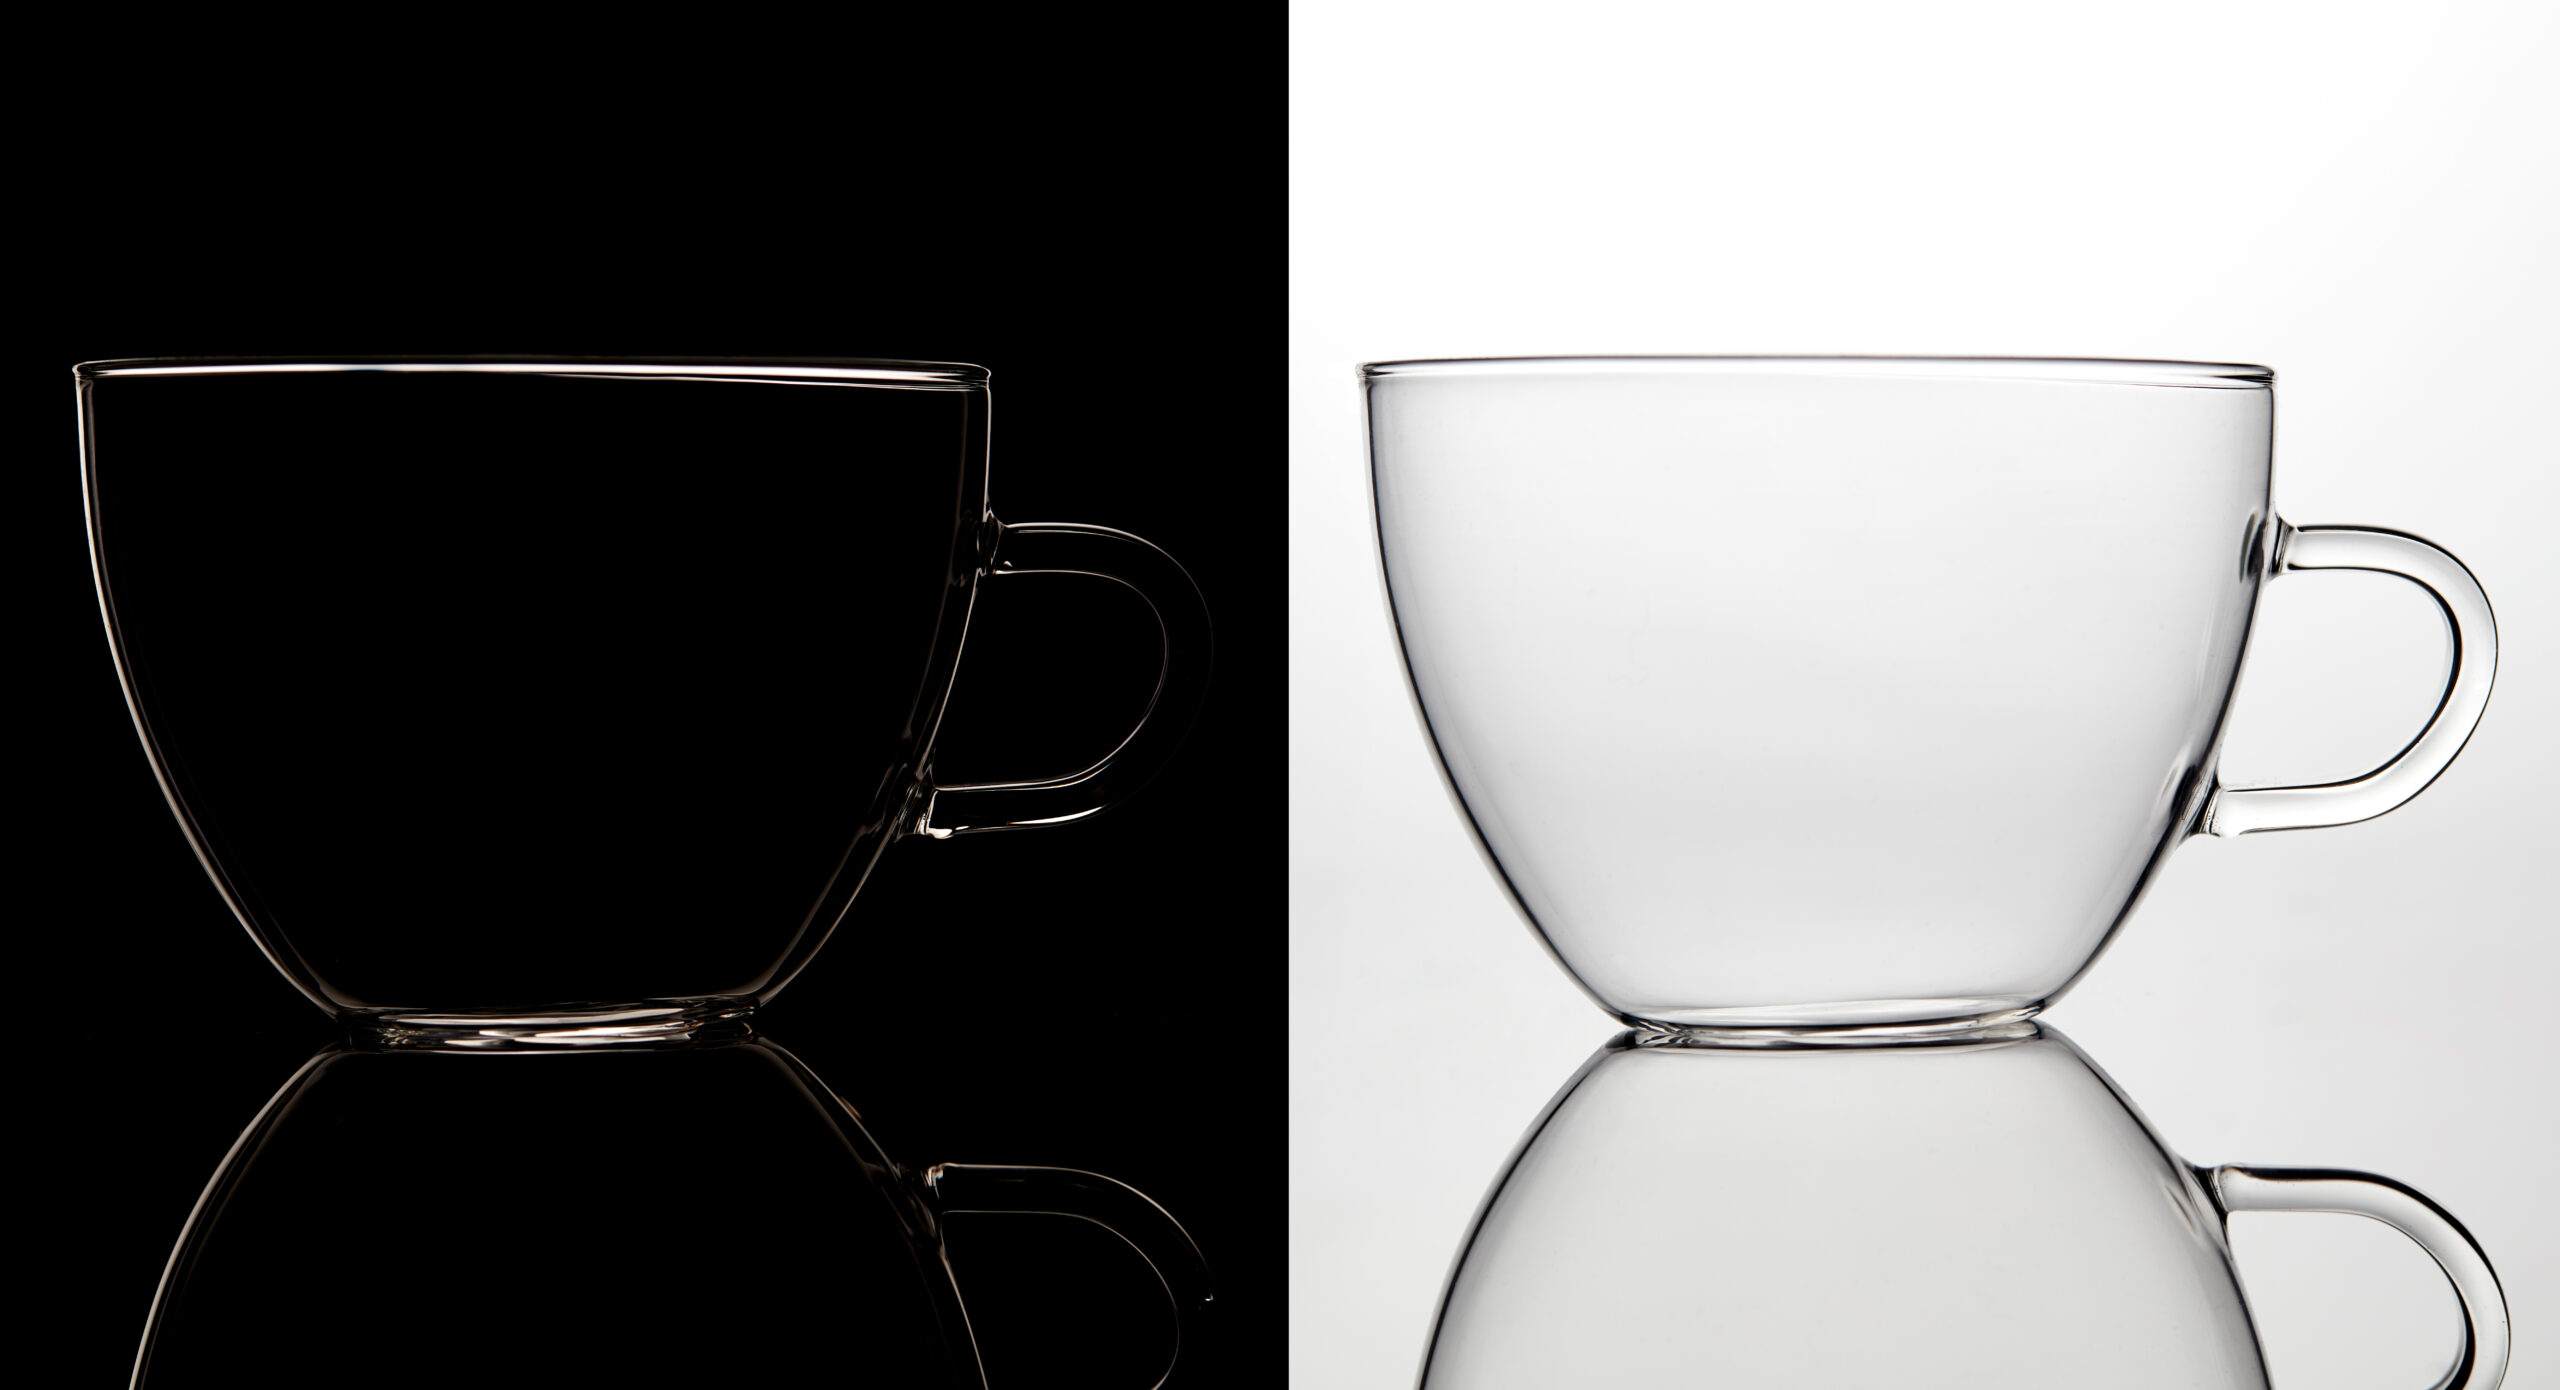 Studio product photography of glass cups